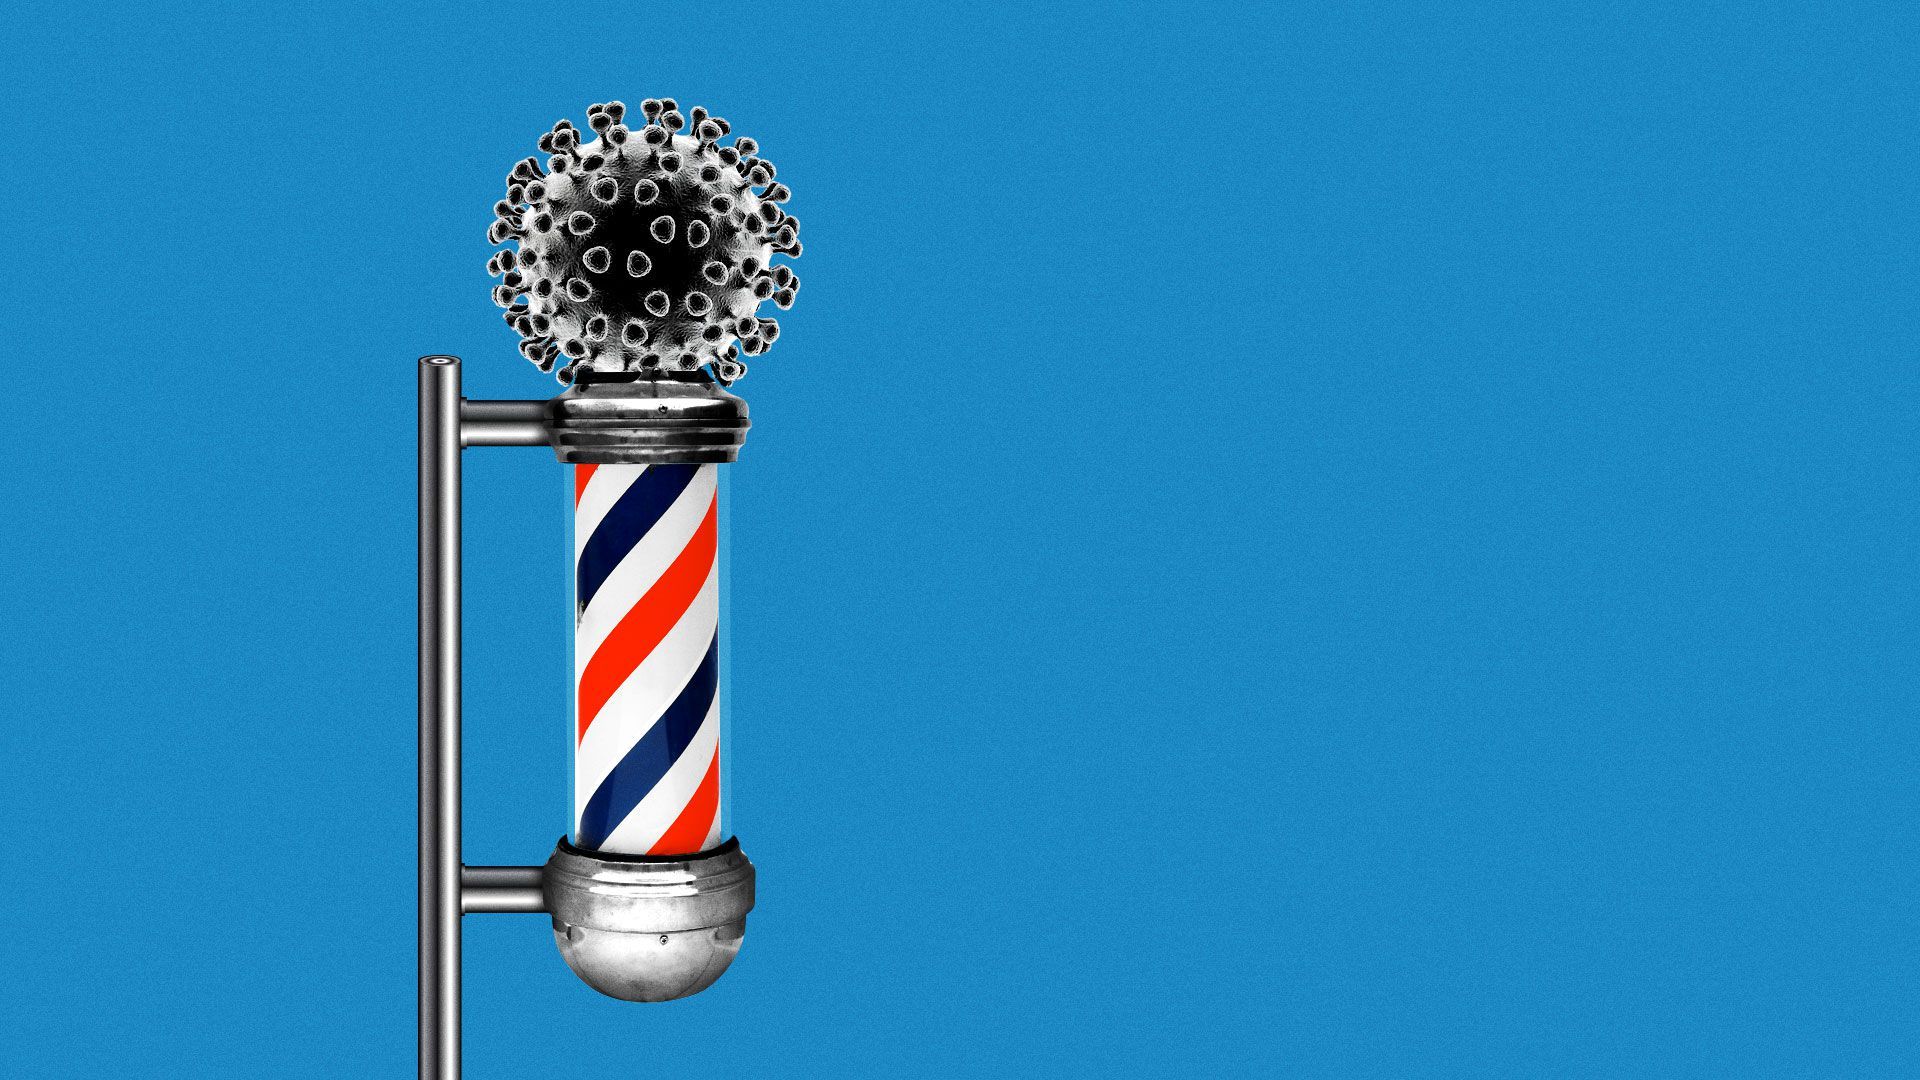 Illustration of barber pole with virus as the top.